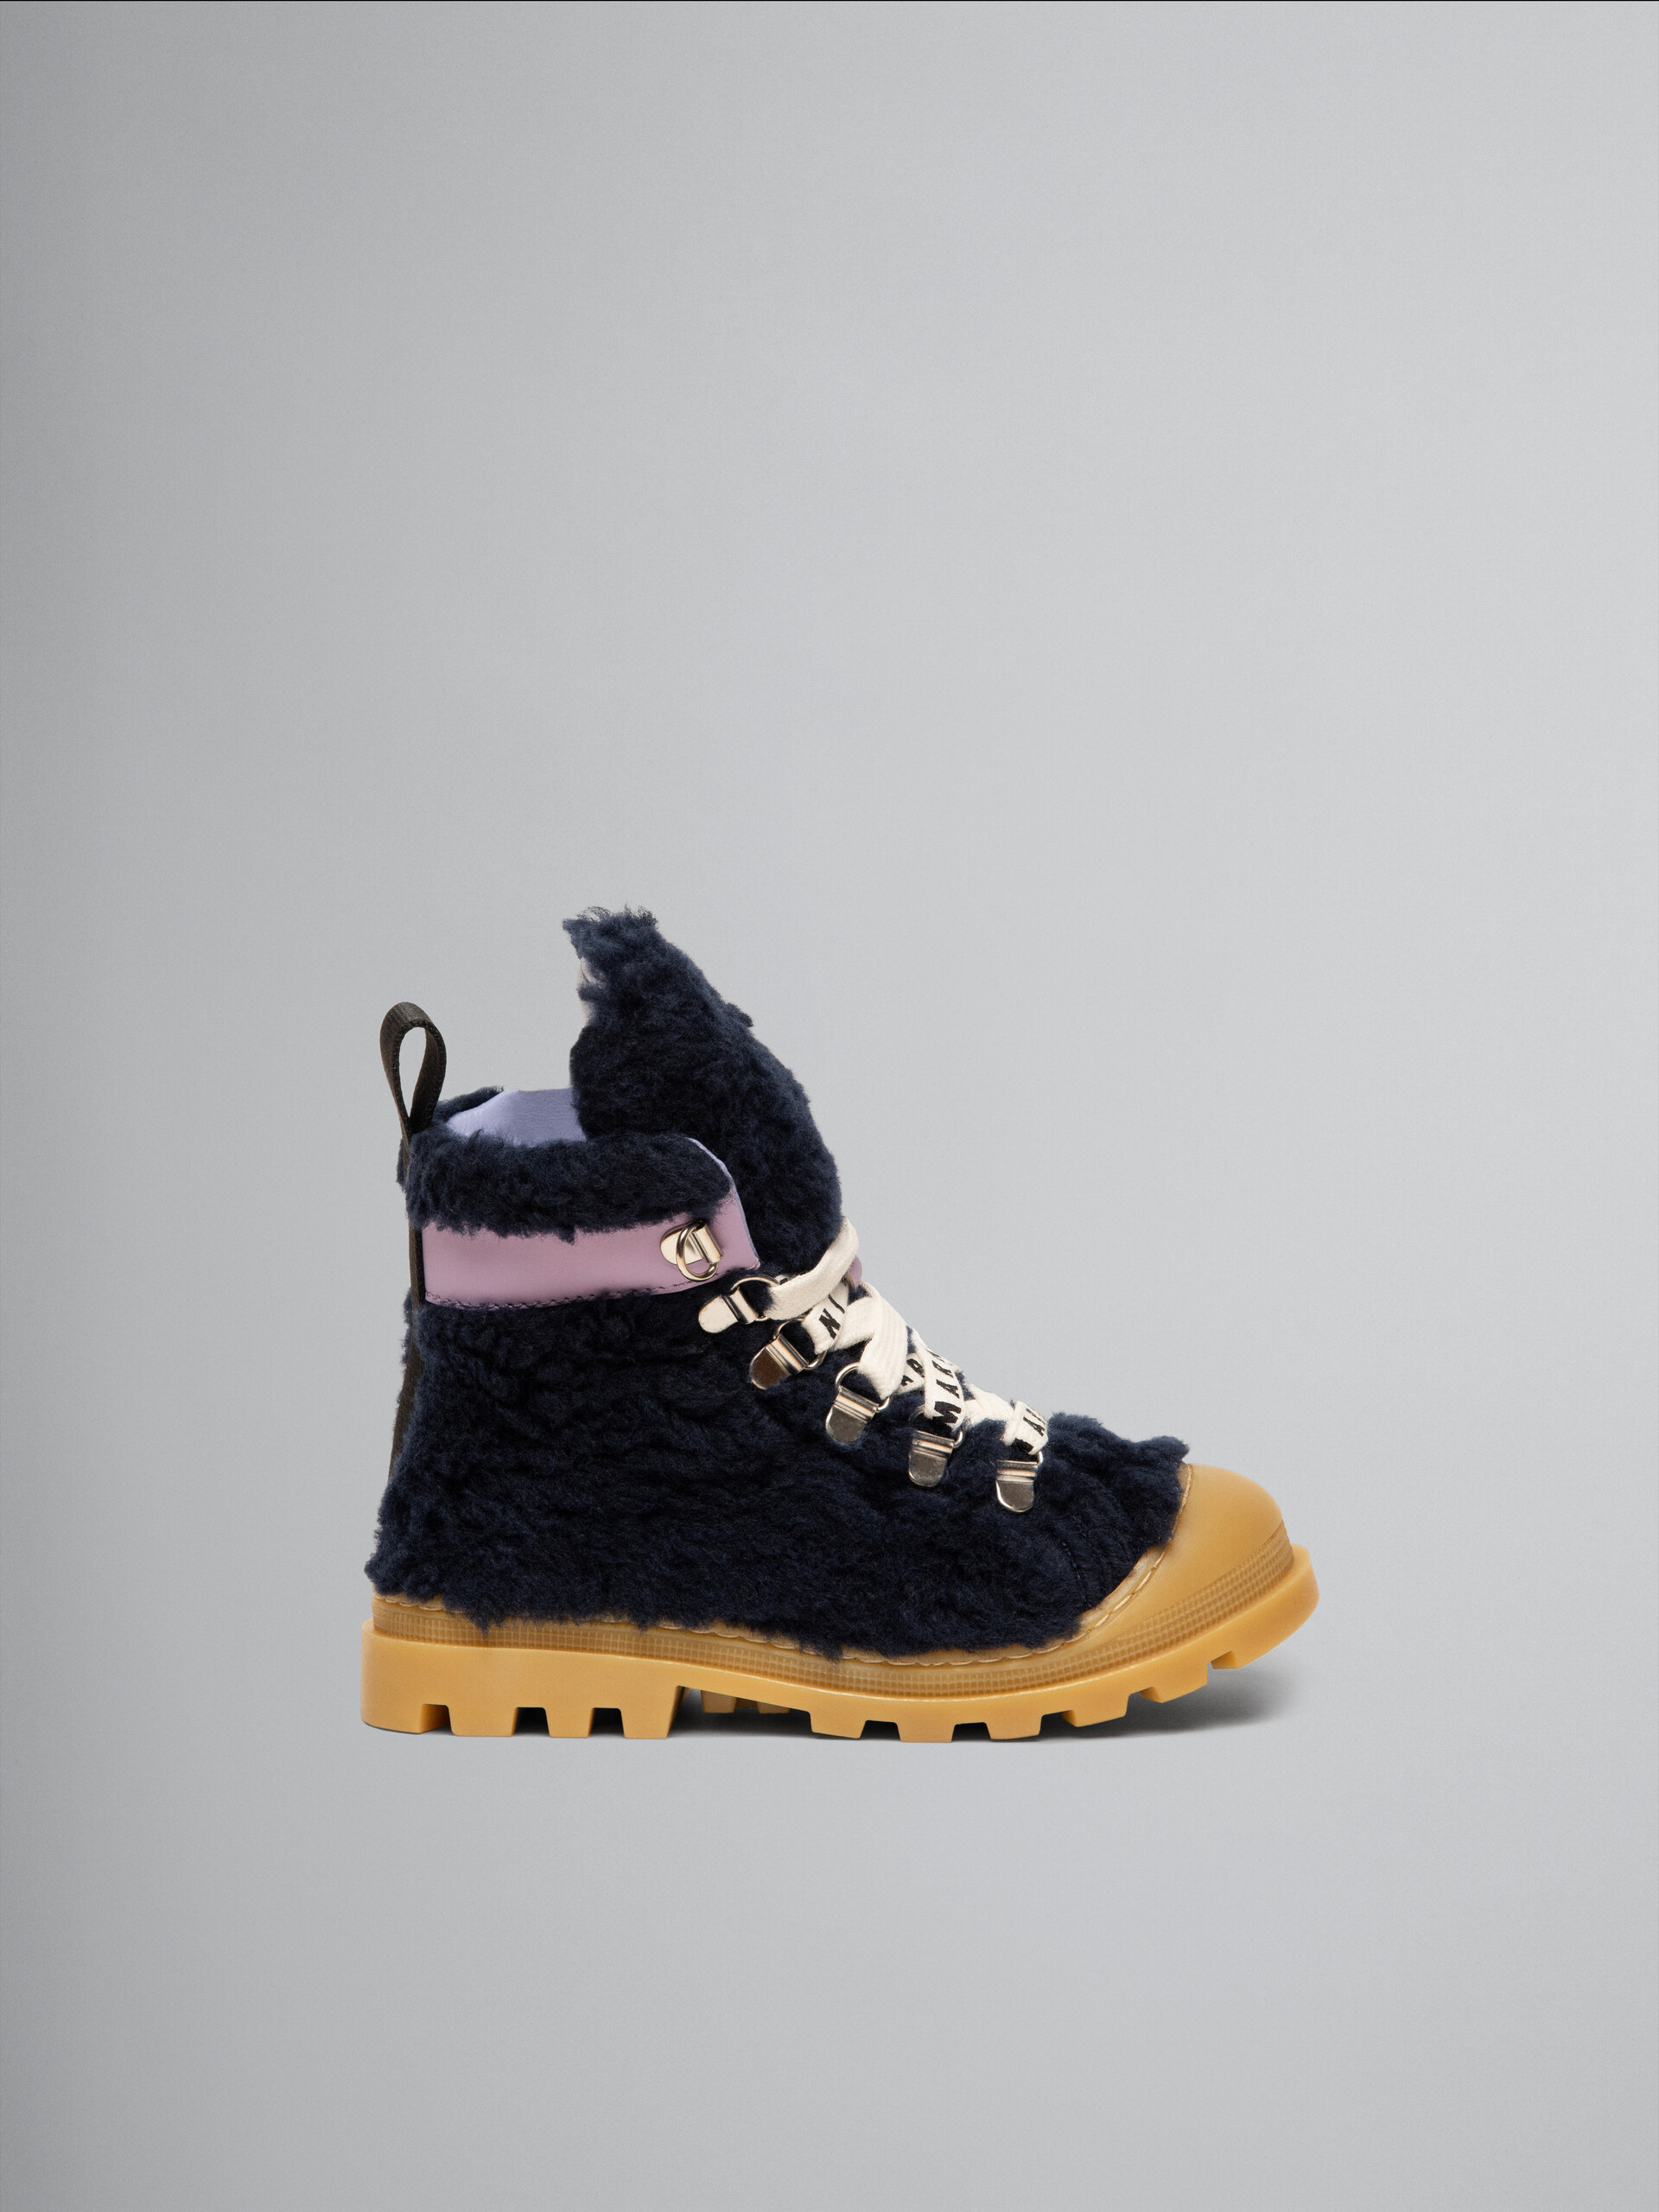 Black mountain boot - Other accessories - Image 1